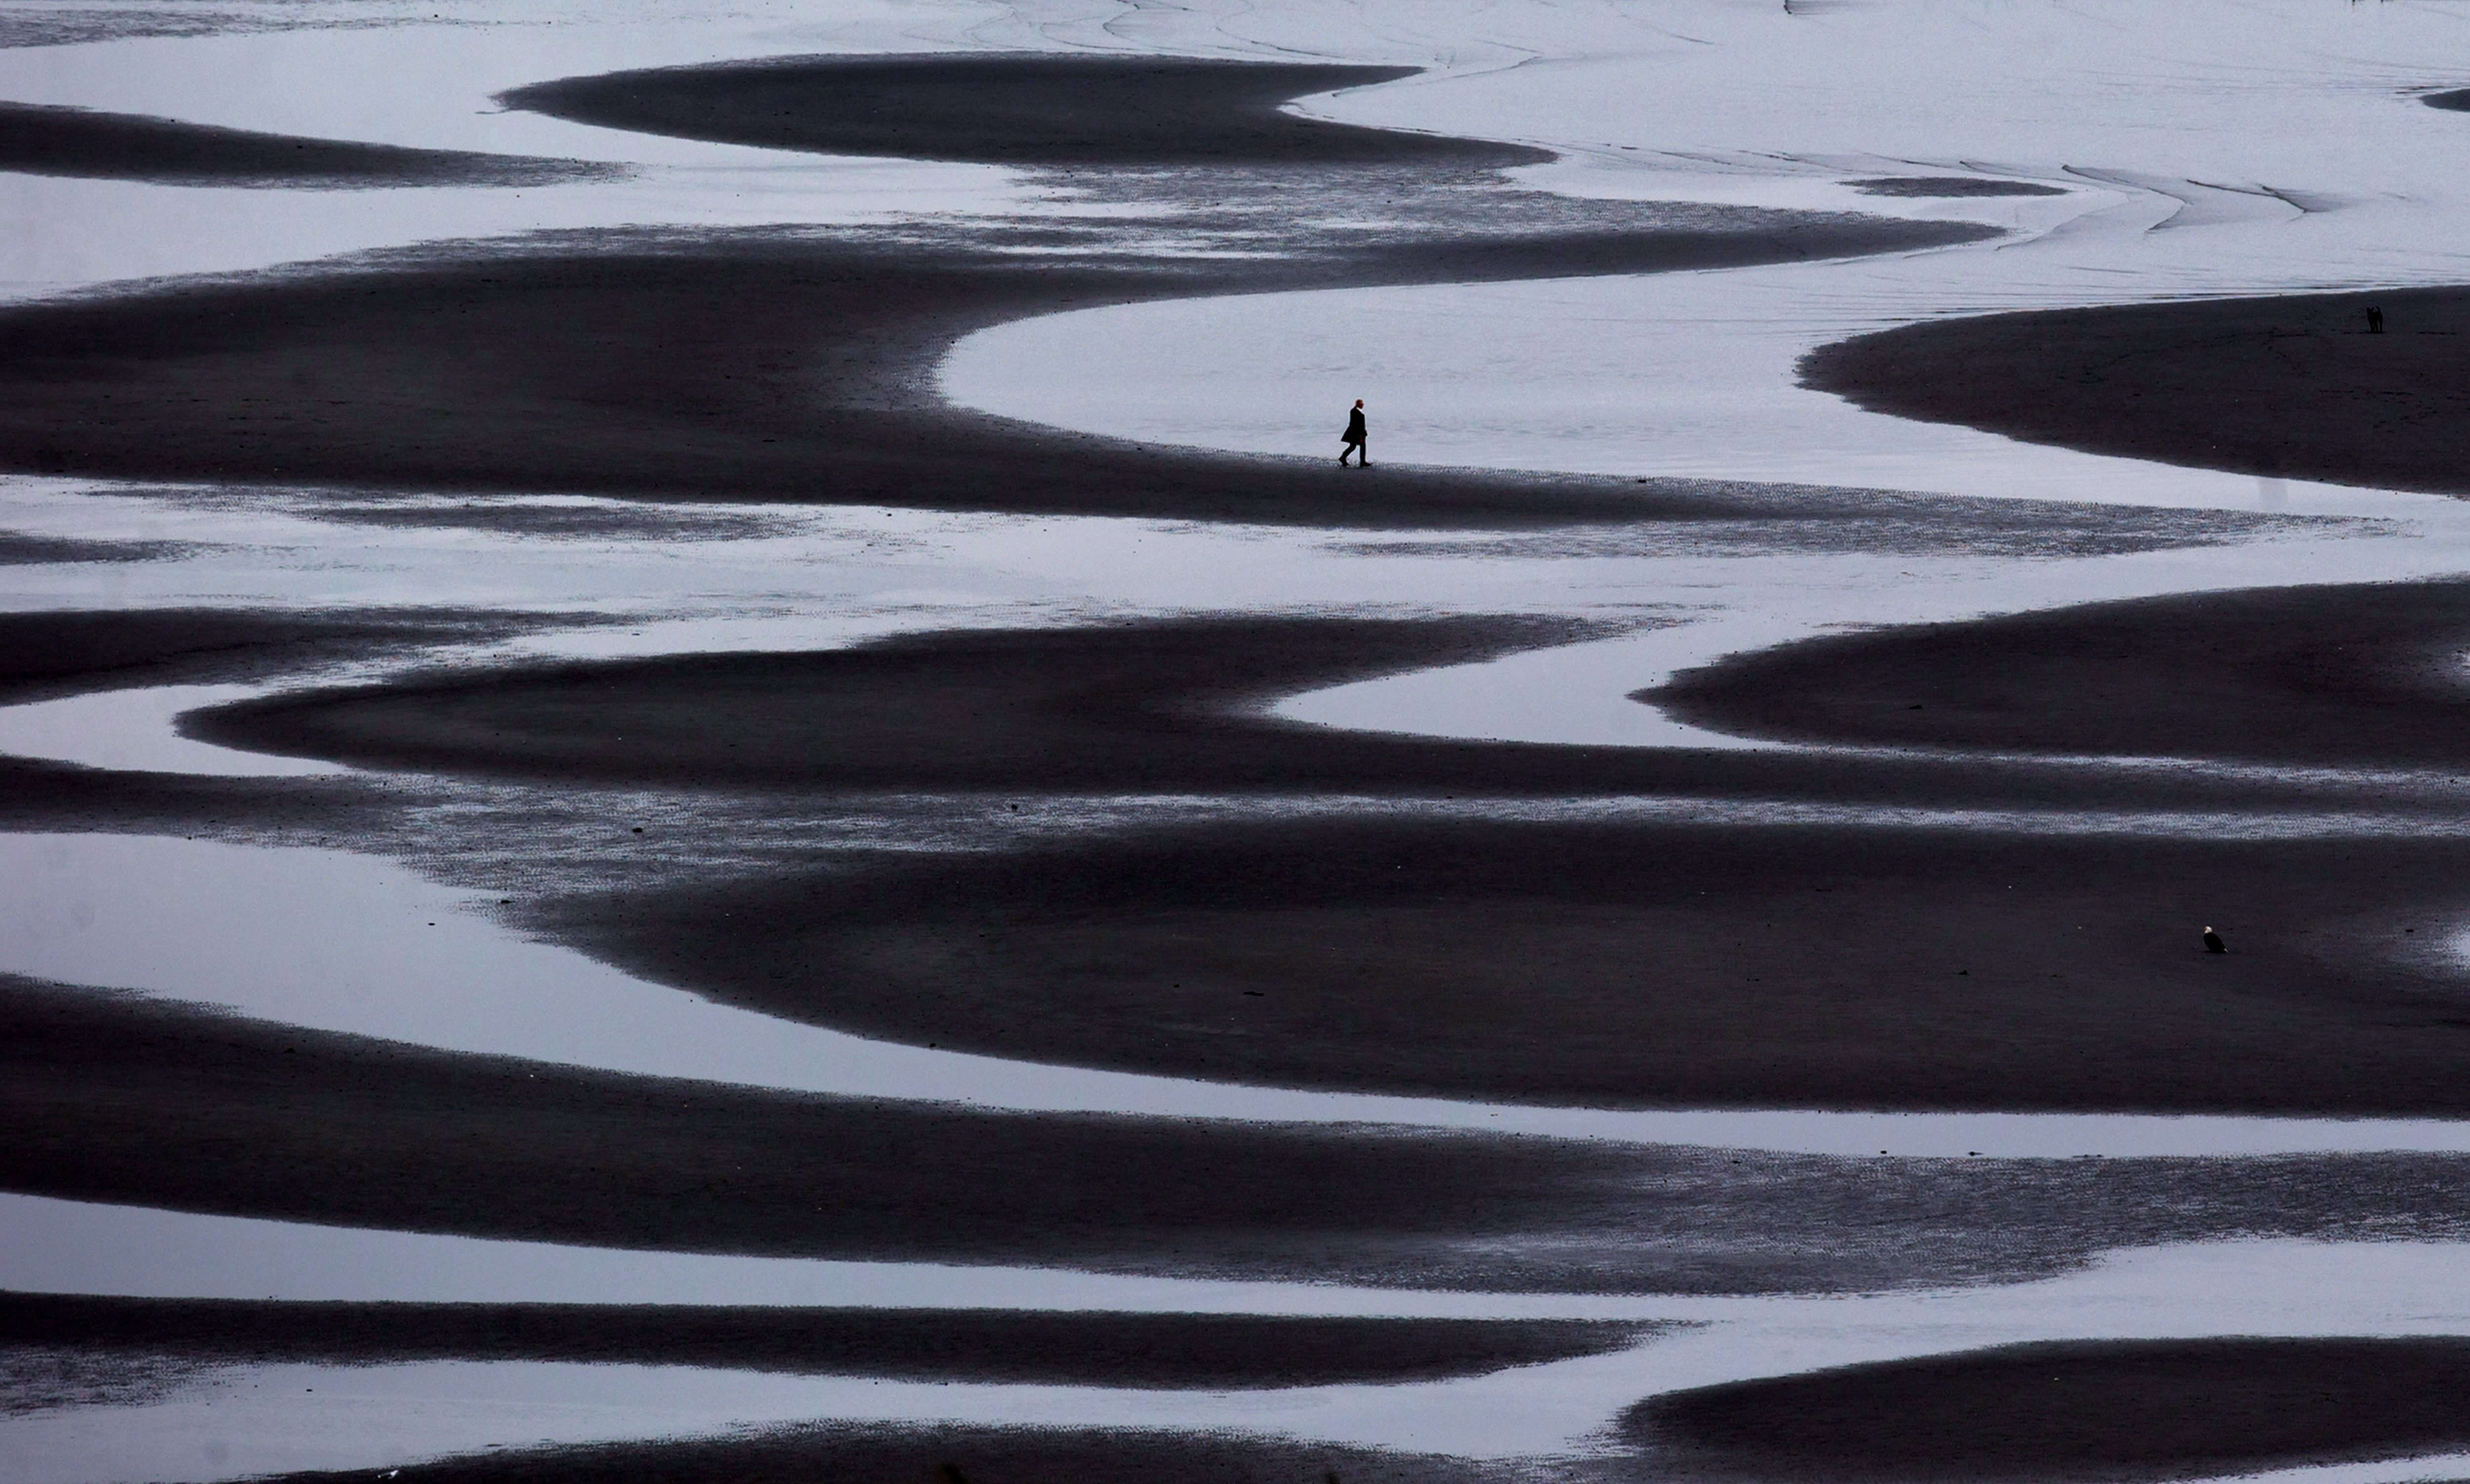 A woman walking through a tidal pool along the shore of Semiahmoo Bay during low tide in White Rock, British Columbia.